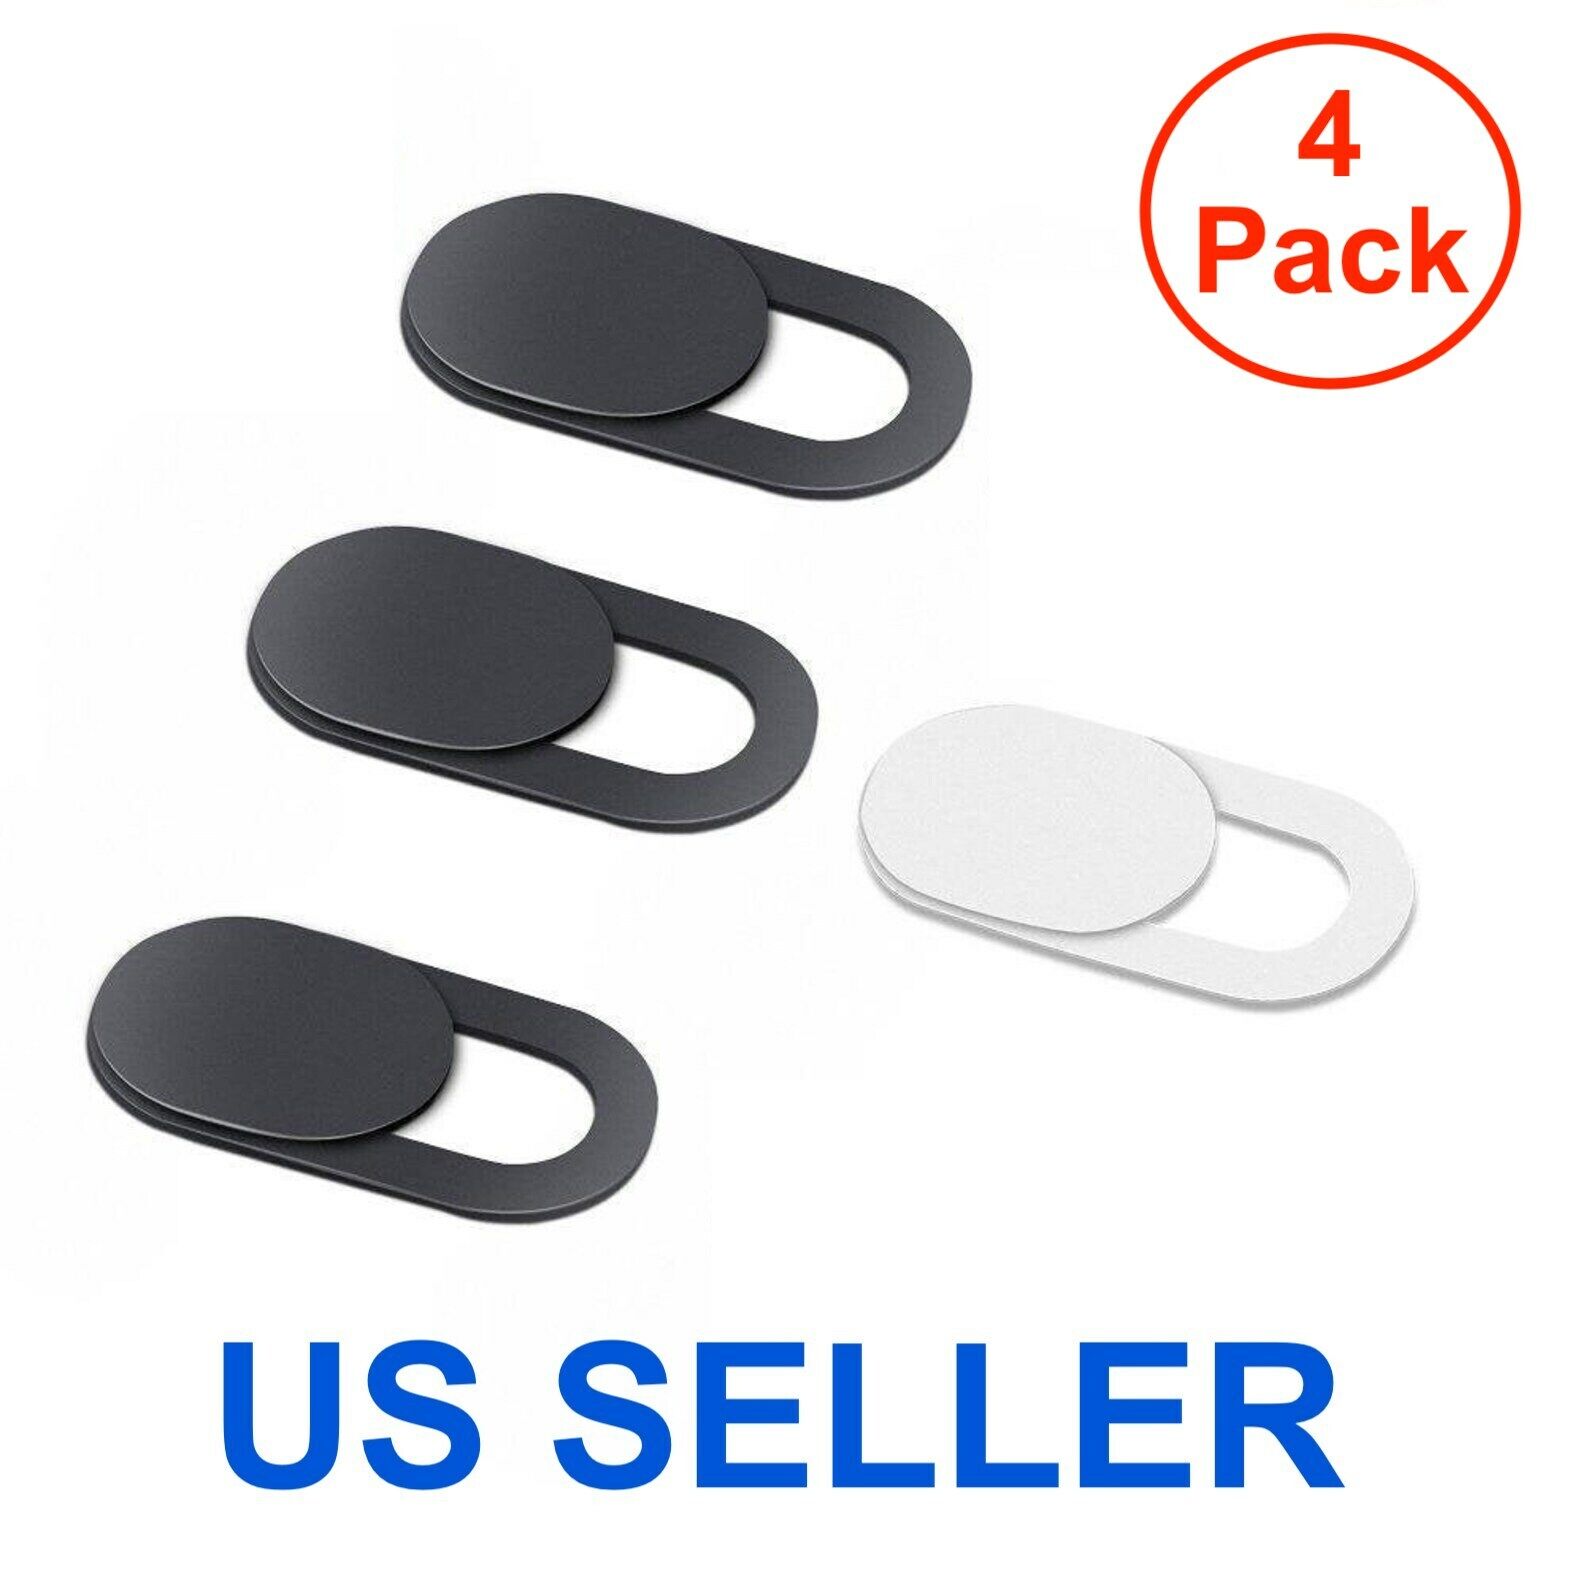 4PCS WebCam Cover Slide Camera Privacy Security Protect Sticker For Phone Laptop